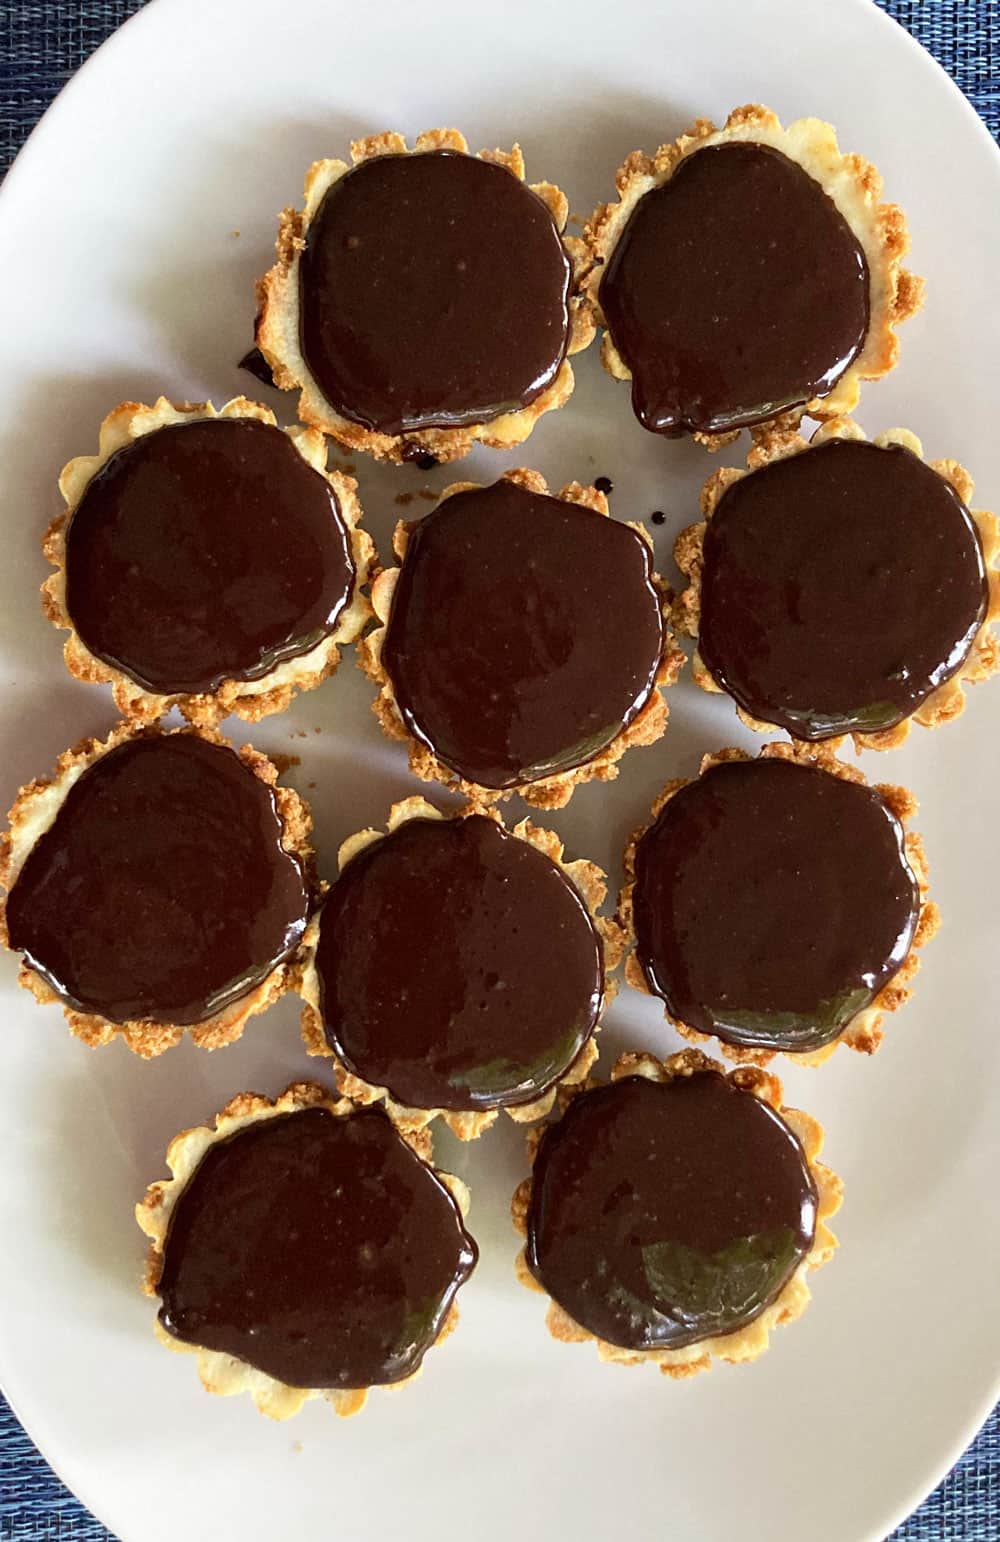 chocolate-topped ricotta tartlets done and ready to eat